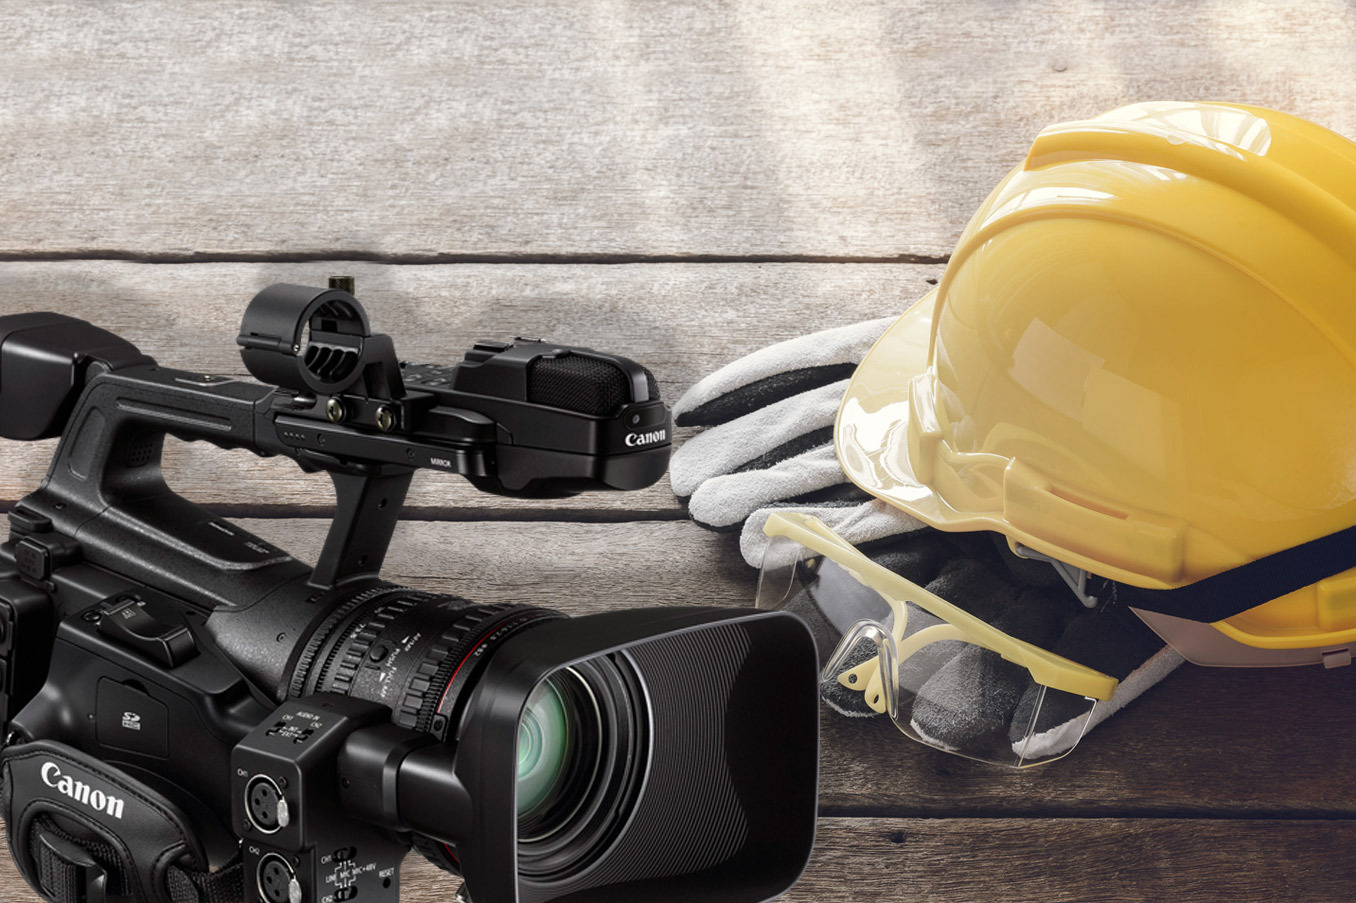 7 Tips On Making Effective Video Testimonials For Your Home Improvement Business